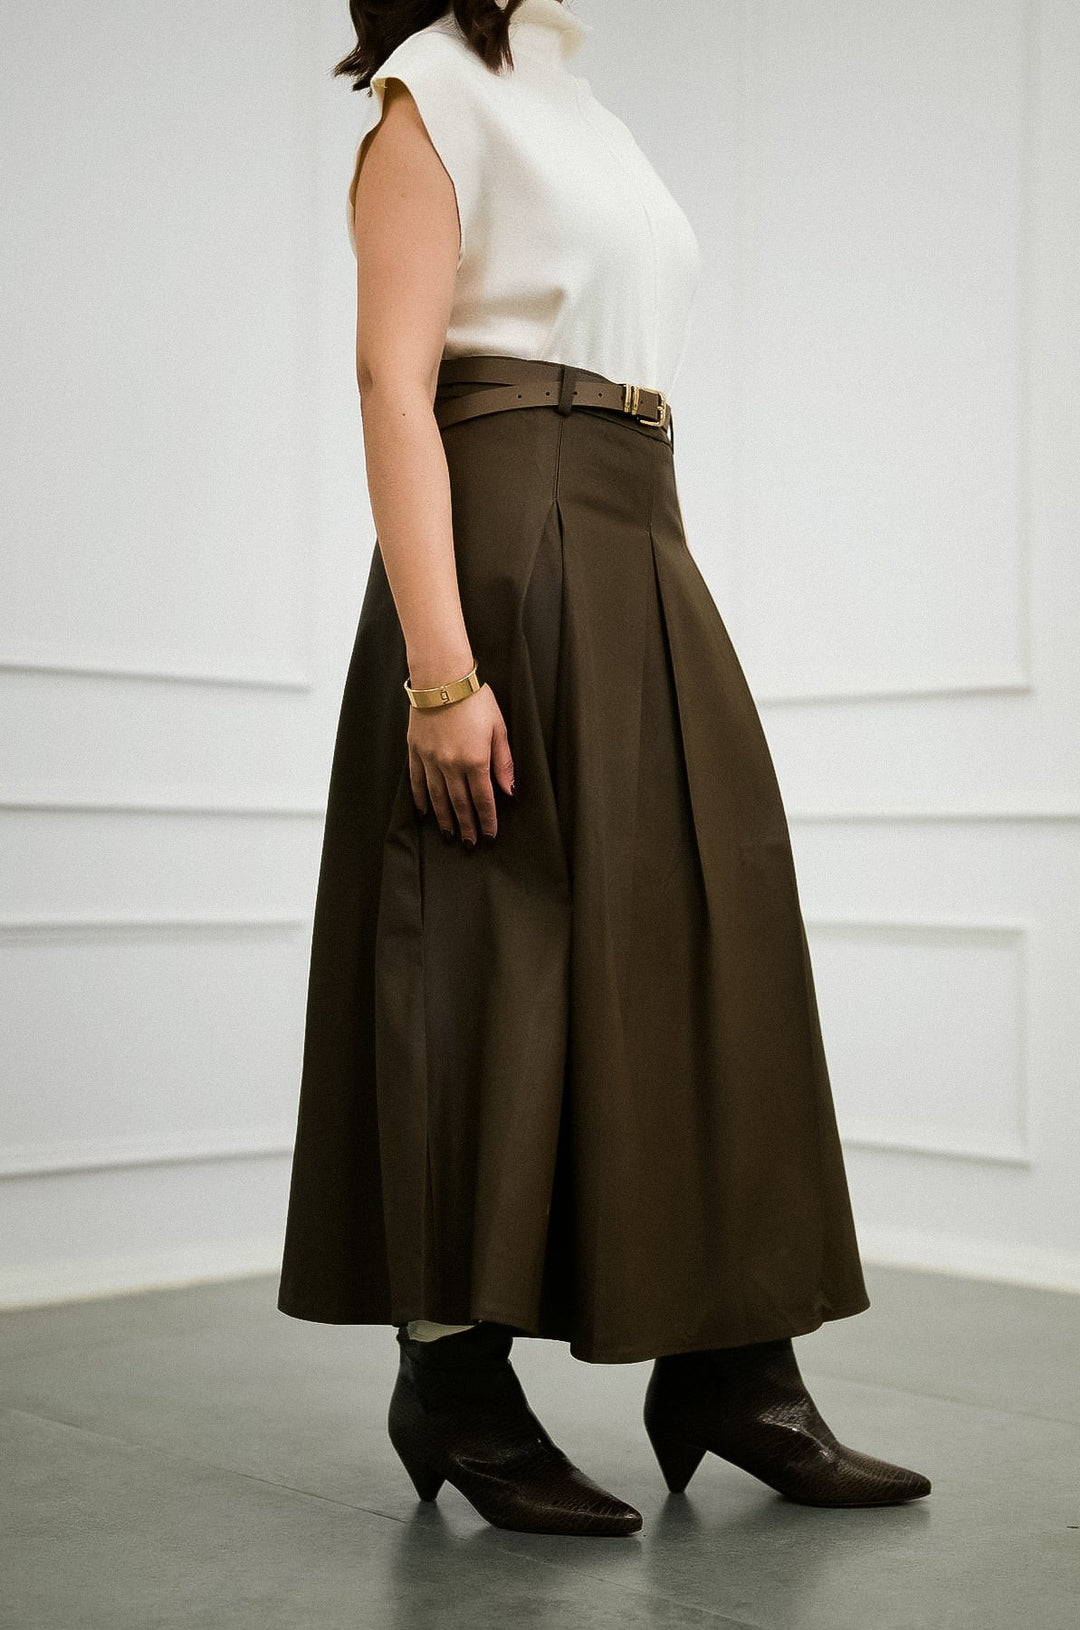  Elegance Box Pleated Skirt in Faux Leather with Matching Belt